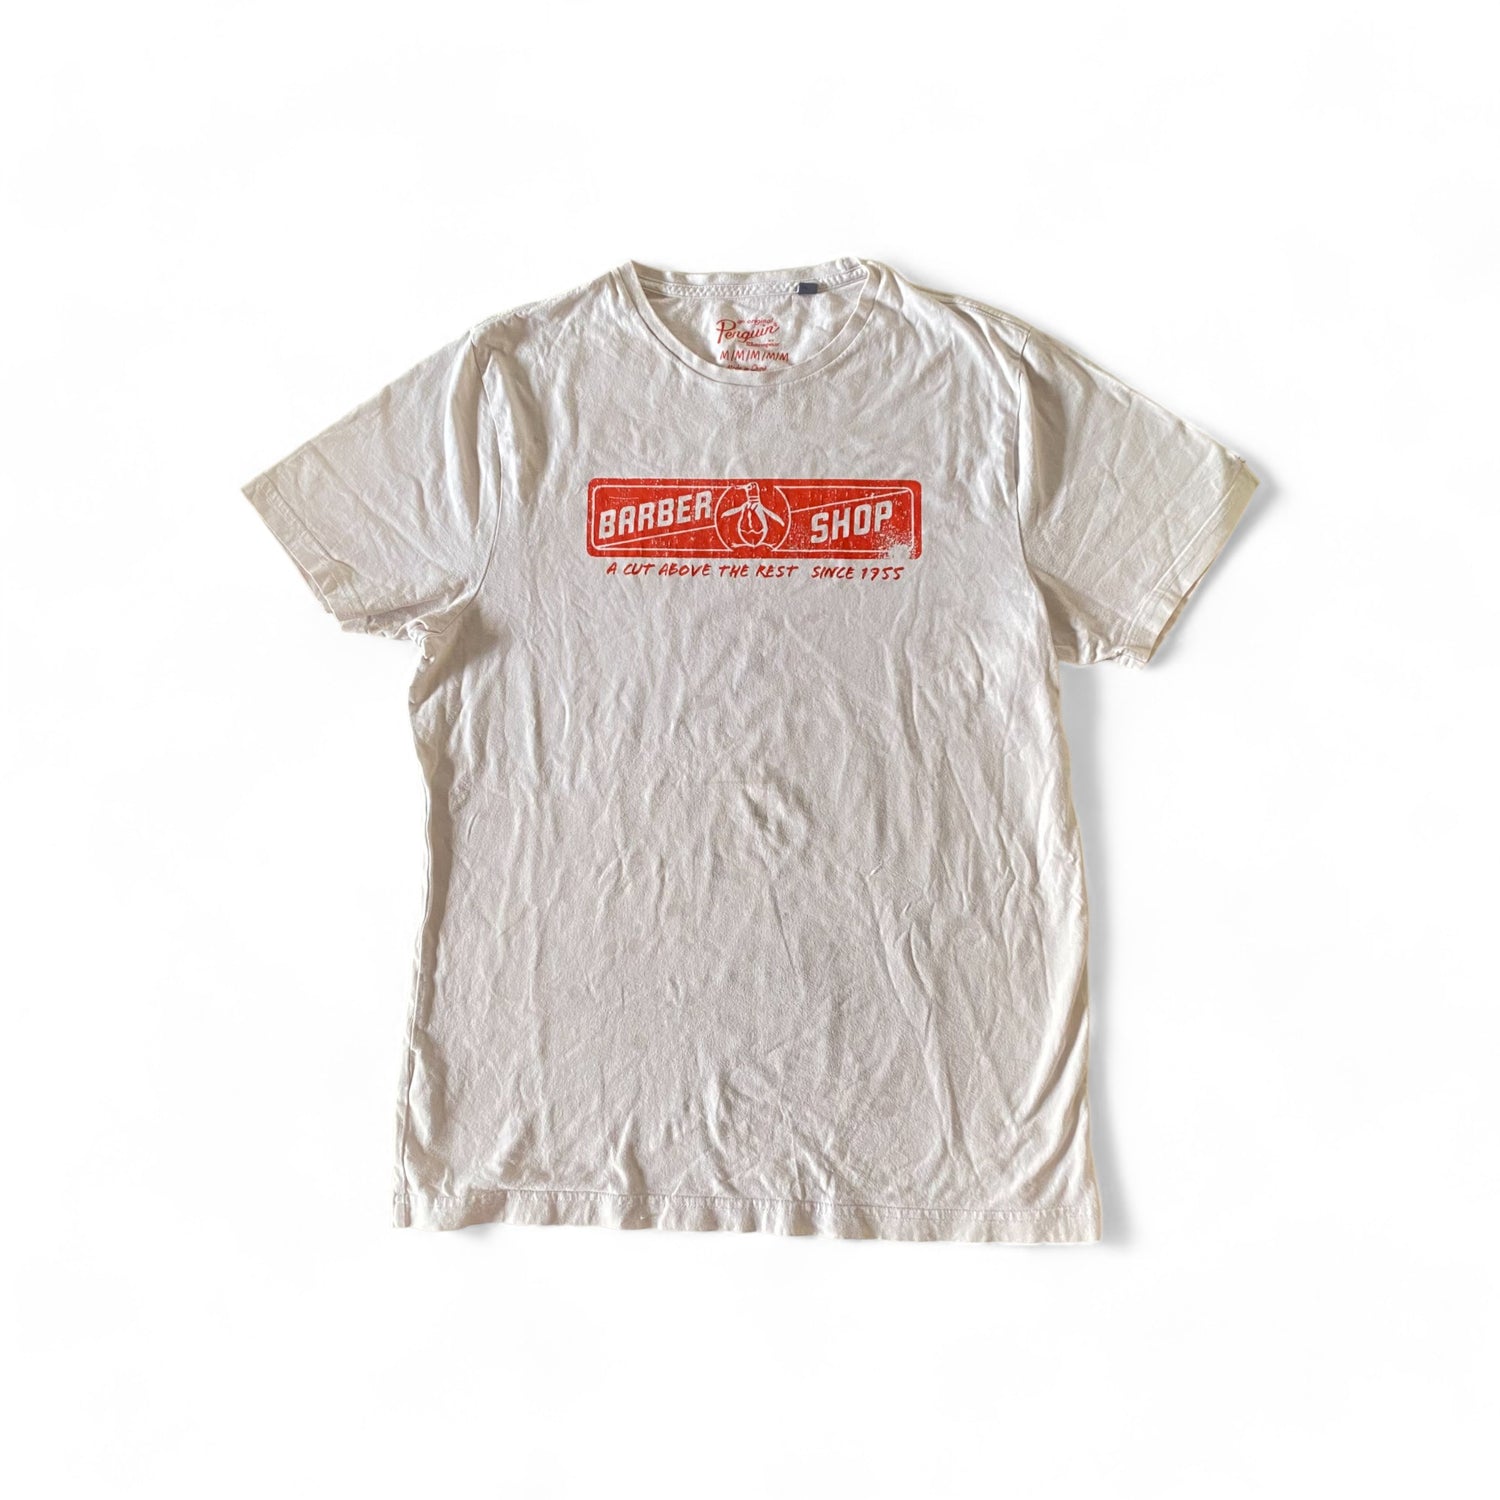 White crewneck t-shirt with a red barber shop logo on the chest. The text “BARBER SHOP” is written above the logo, and “A CUT ABOVE THE REST SINCE 1955” is written below it.  Google vintage and second hand clothing